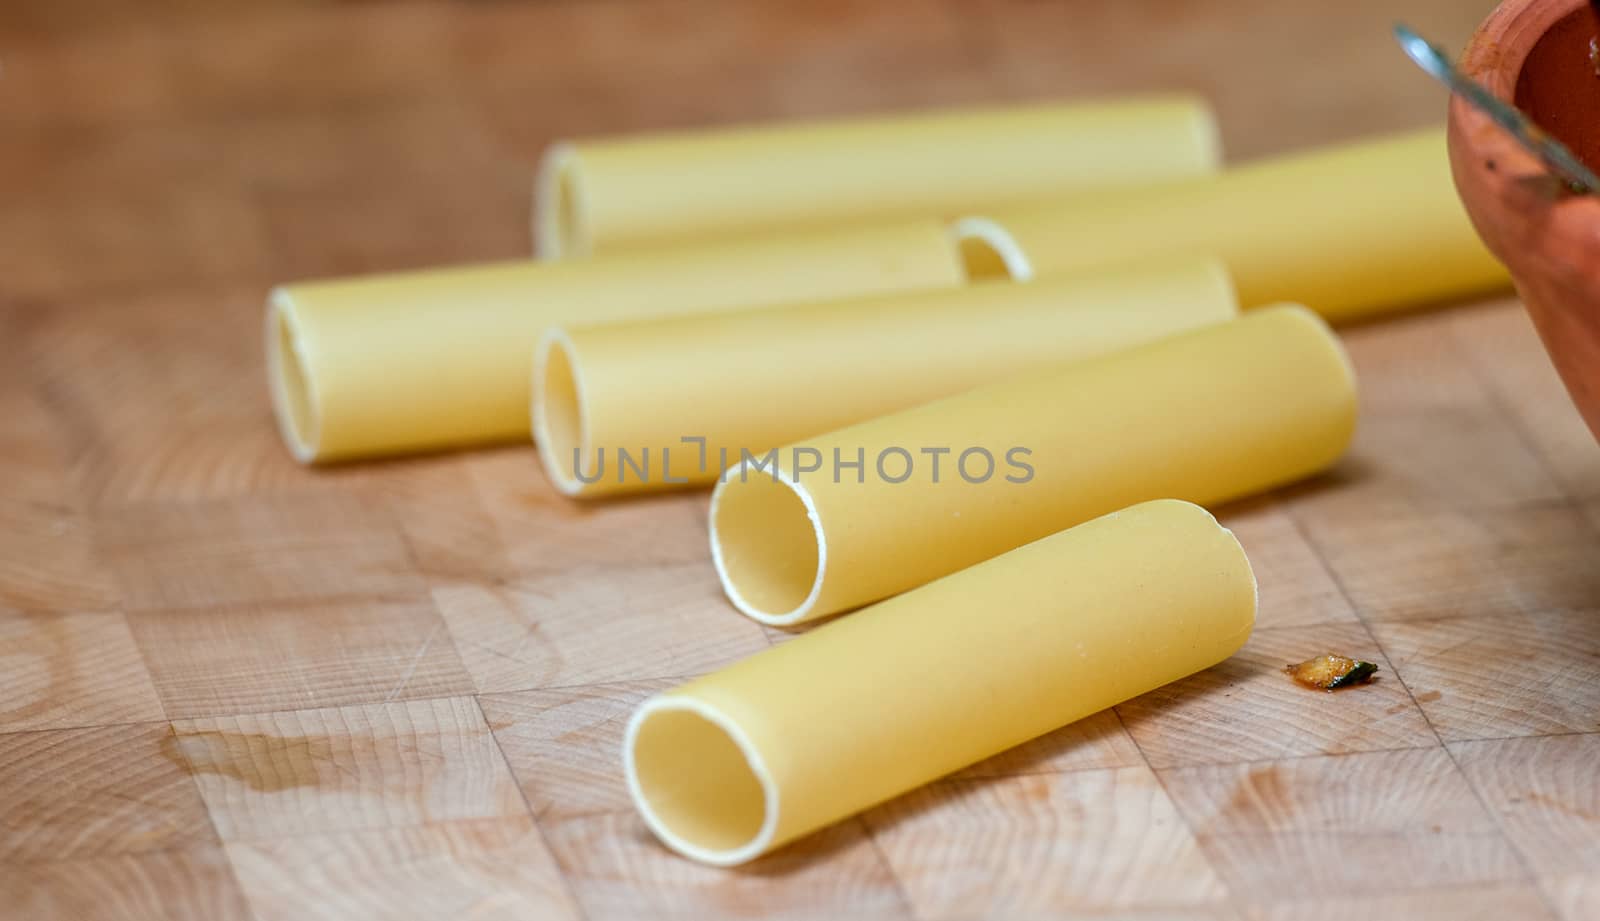 Dried Italian cannelloni pasta tubes made from durum wheat dough for a healthy Mediterranean diet by sirspread